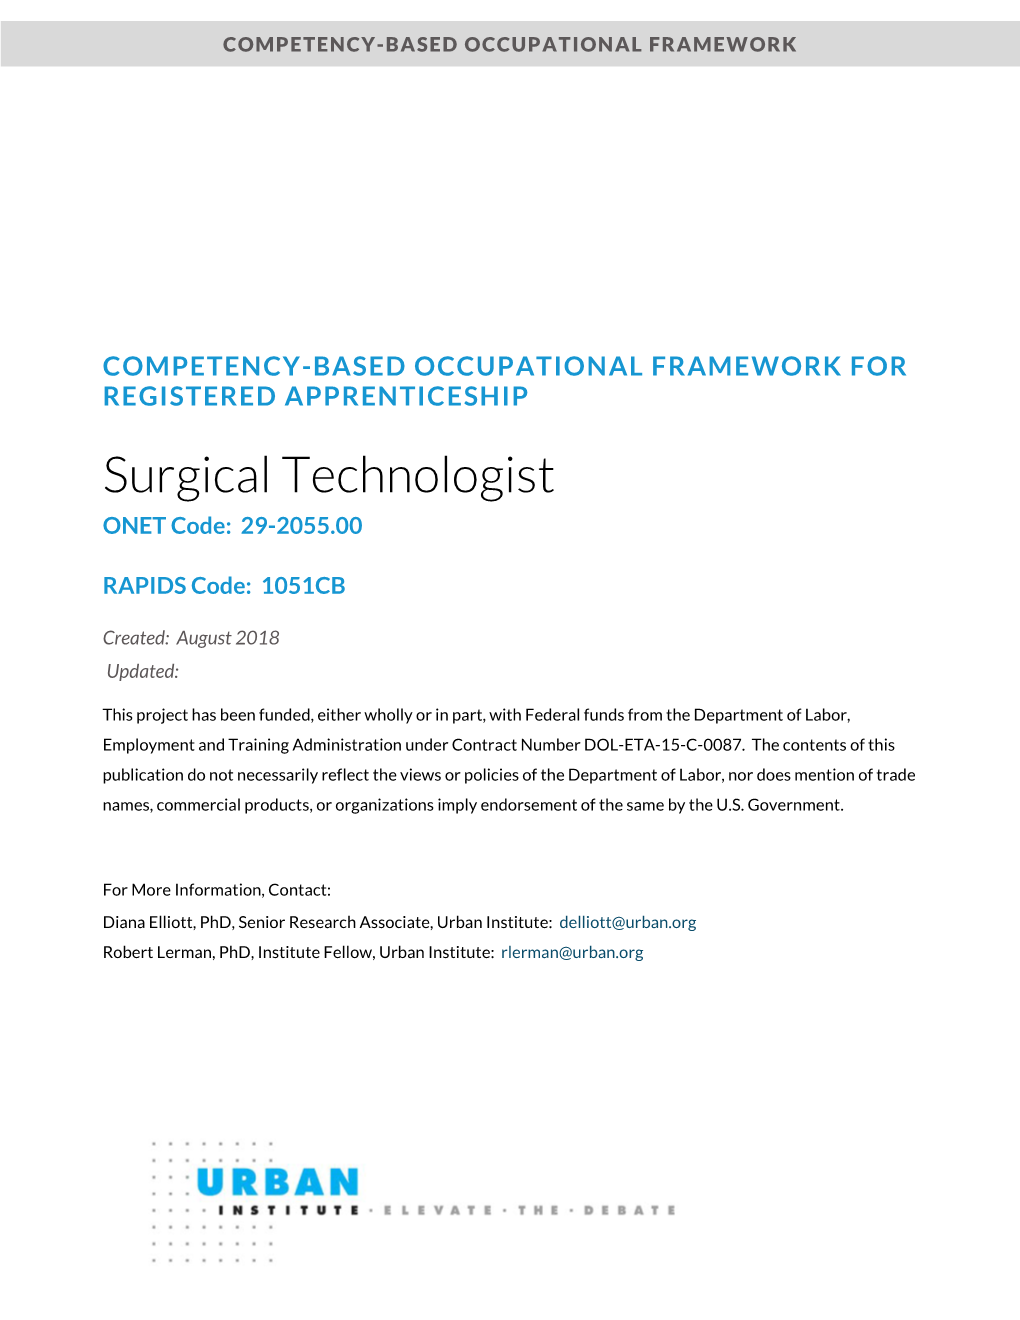 Surgical Technologist ONET Code: 29-2055.00